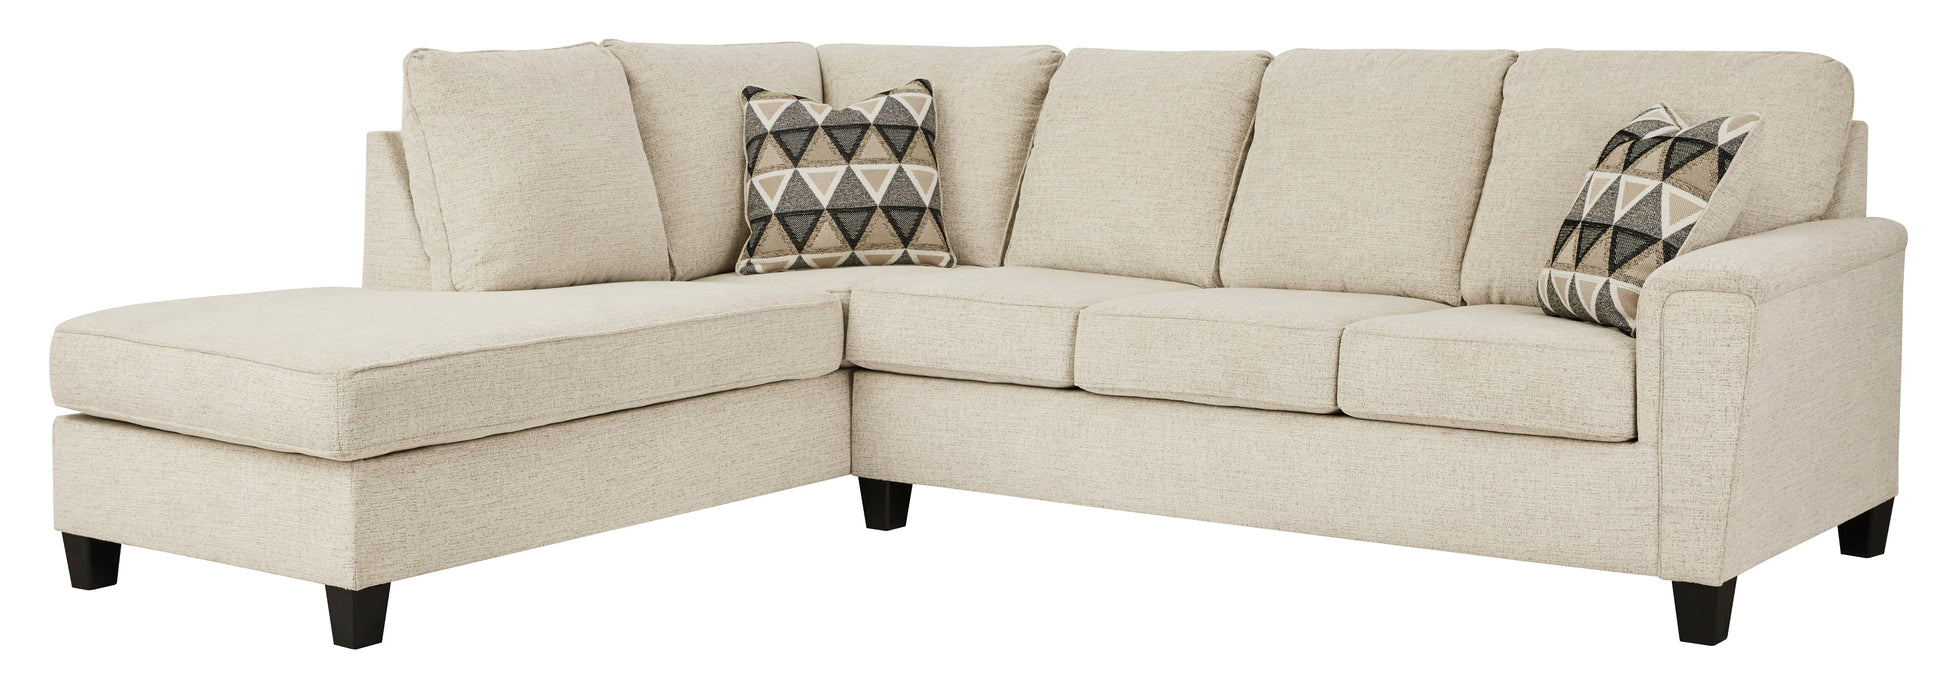 Abinger 2-Piece Sectional with Ottoman JB's Furniture  Home Furniture, Home Decor, Furniture Store